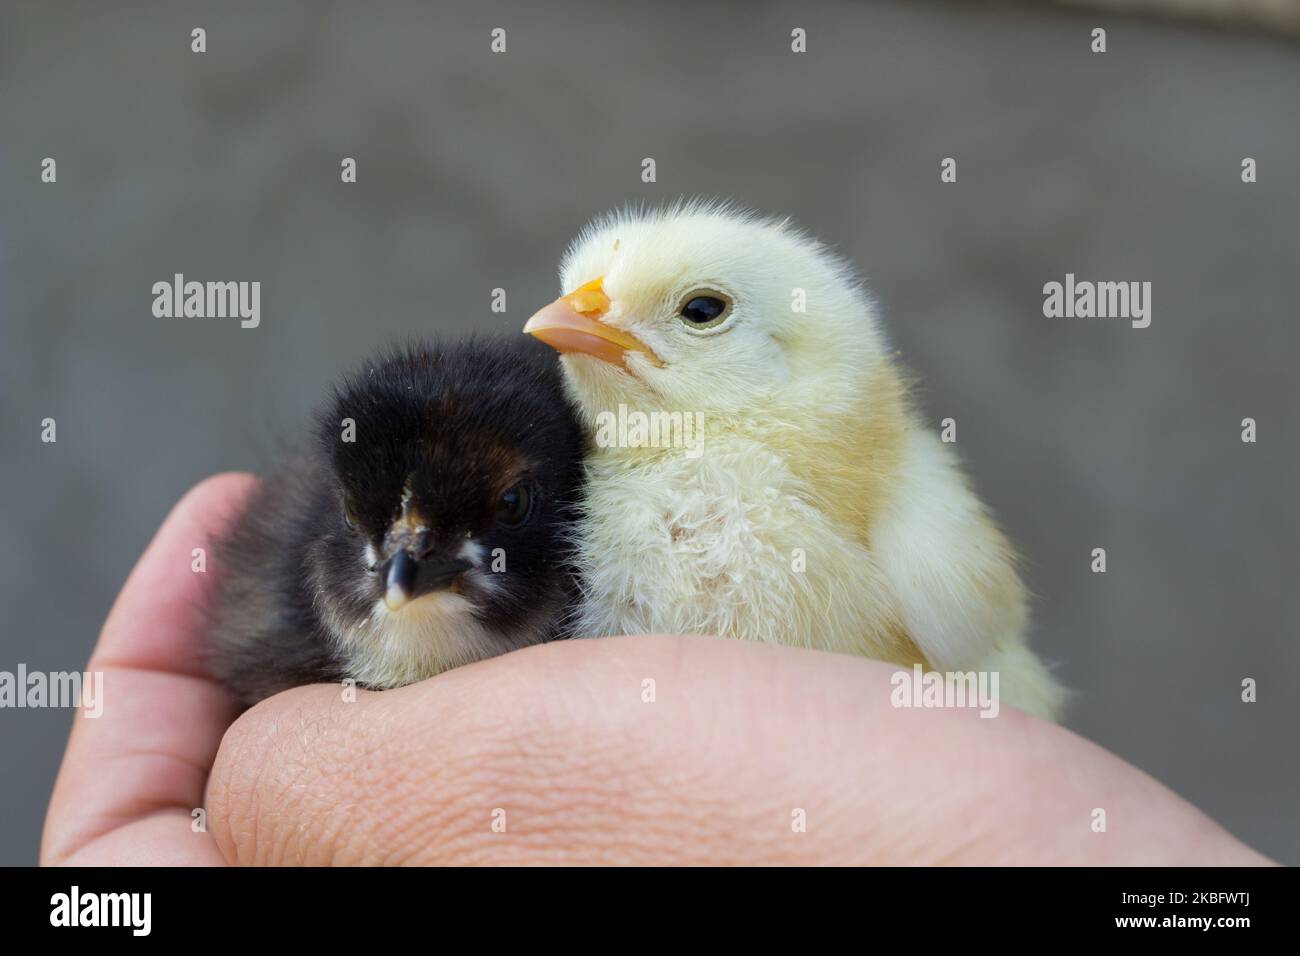 a pair of newborn chicks white and black hands Stock Photo